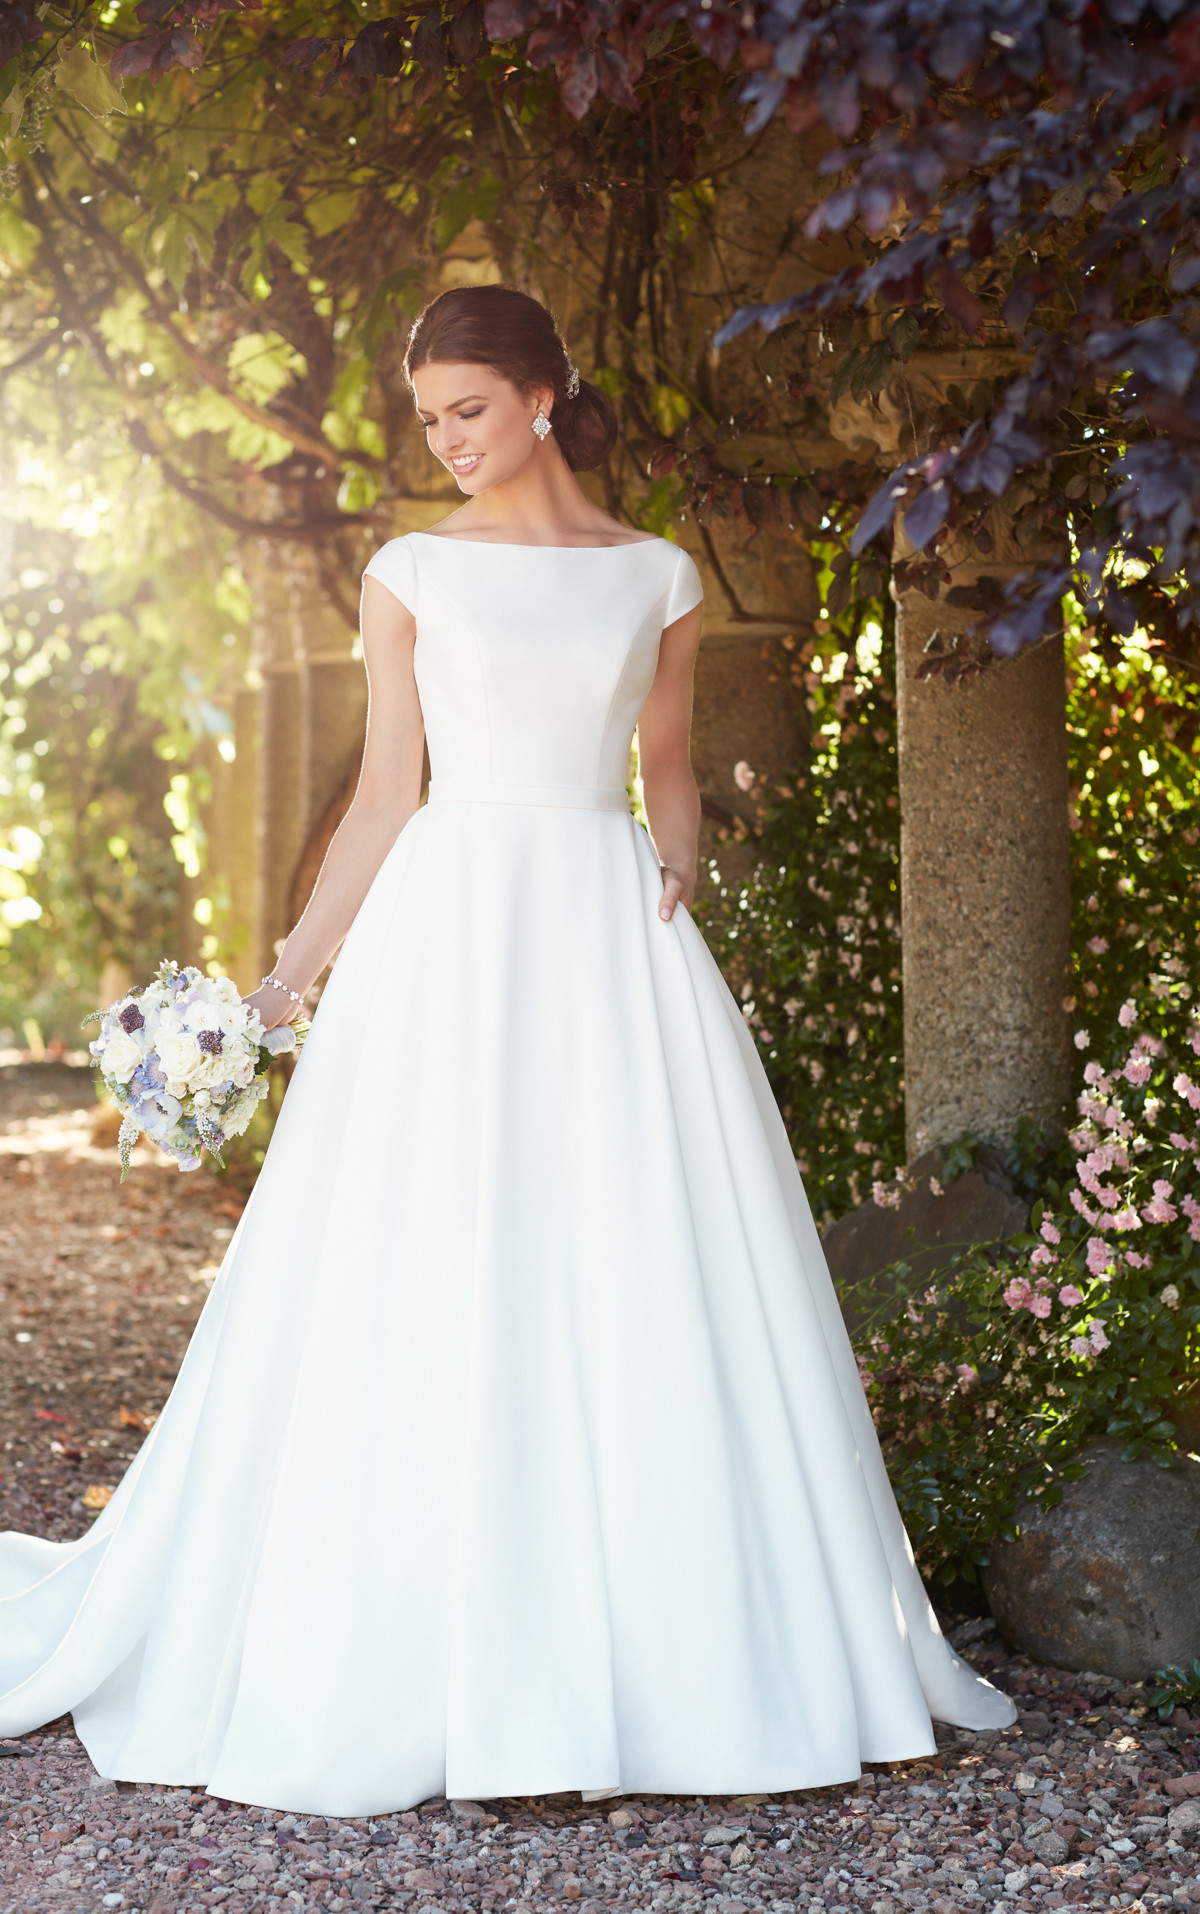 Modest Wedding Gowns
 Modest Wedding Dress with Sleeves